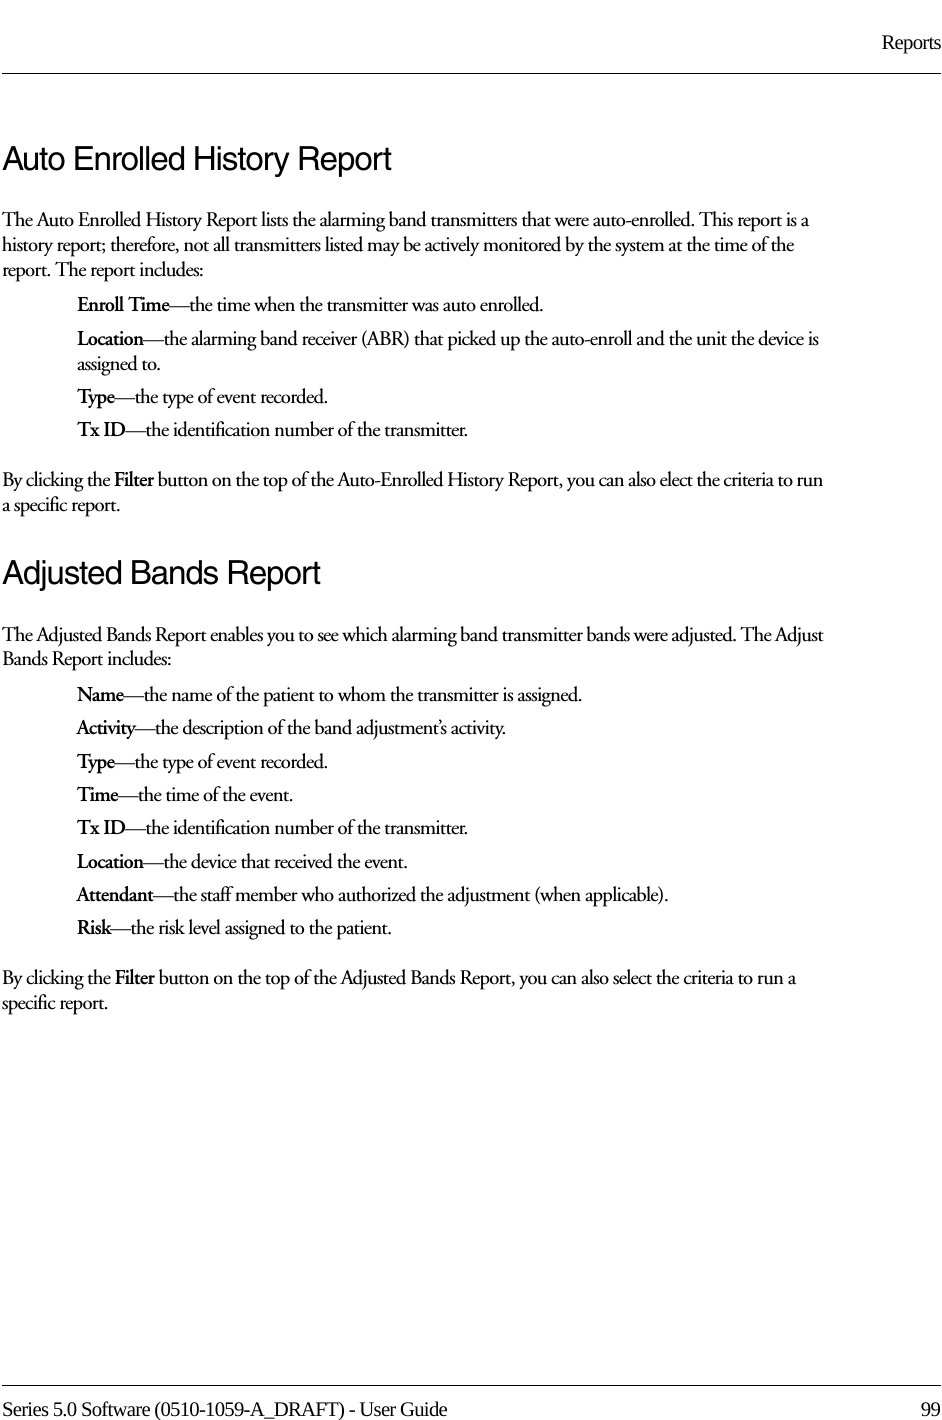 Series 5.0 Software (0510-1059-A_DRAFT) - User Guide  99ReportsAuto Enrolled History ReportThe Auto Enrolled History Report lists the alarming band transmitters that were auto-enrolled. This report is a history report; therefore, not all transmitters listed may be actively monitored by the system at the time of the report. The report includes:Enroll Time—the time when the transmitter was auto enrolled. Location—the alarming band receiver (ABR) that picked up the auto-enroll and the unit the device is assigned to.Typ e—the type of event recorded.Tx ID—the identification number of the transmitter.By clicking the Filter button on the top of the Auto-Enrolled History Report, you can also elect the criteria to run a specific report.Adjusted Bands ReportThe Adjusted Bands Report enables you to see which alarming band transmitter bands were adjusted. The Adjust Bands Report includes:Name—the name of the patient to whom the transmitter is assigned.Activity—the description of the band adjustment’s activity.Typ e—the type of event recorded.Time—the time of the event.Tx ID—the identification number of the transmitter.Location—the device that received the event.Attendant—the staff member who authorized the adjustment (when applicable).Risk—the risk level assigned to the patient.By clicking the Filter button on the top of the Adjusted Bands Report, you can also select the criteria to run a specific report.